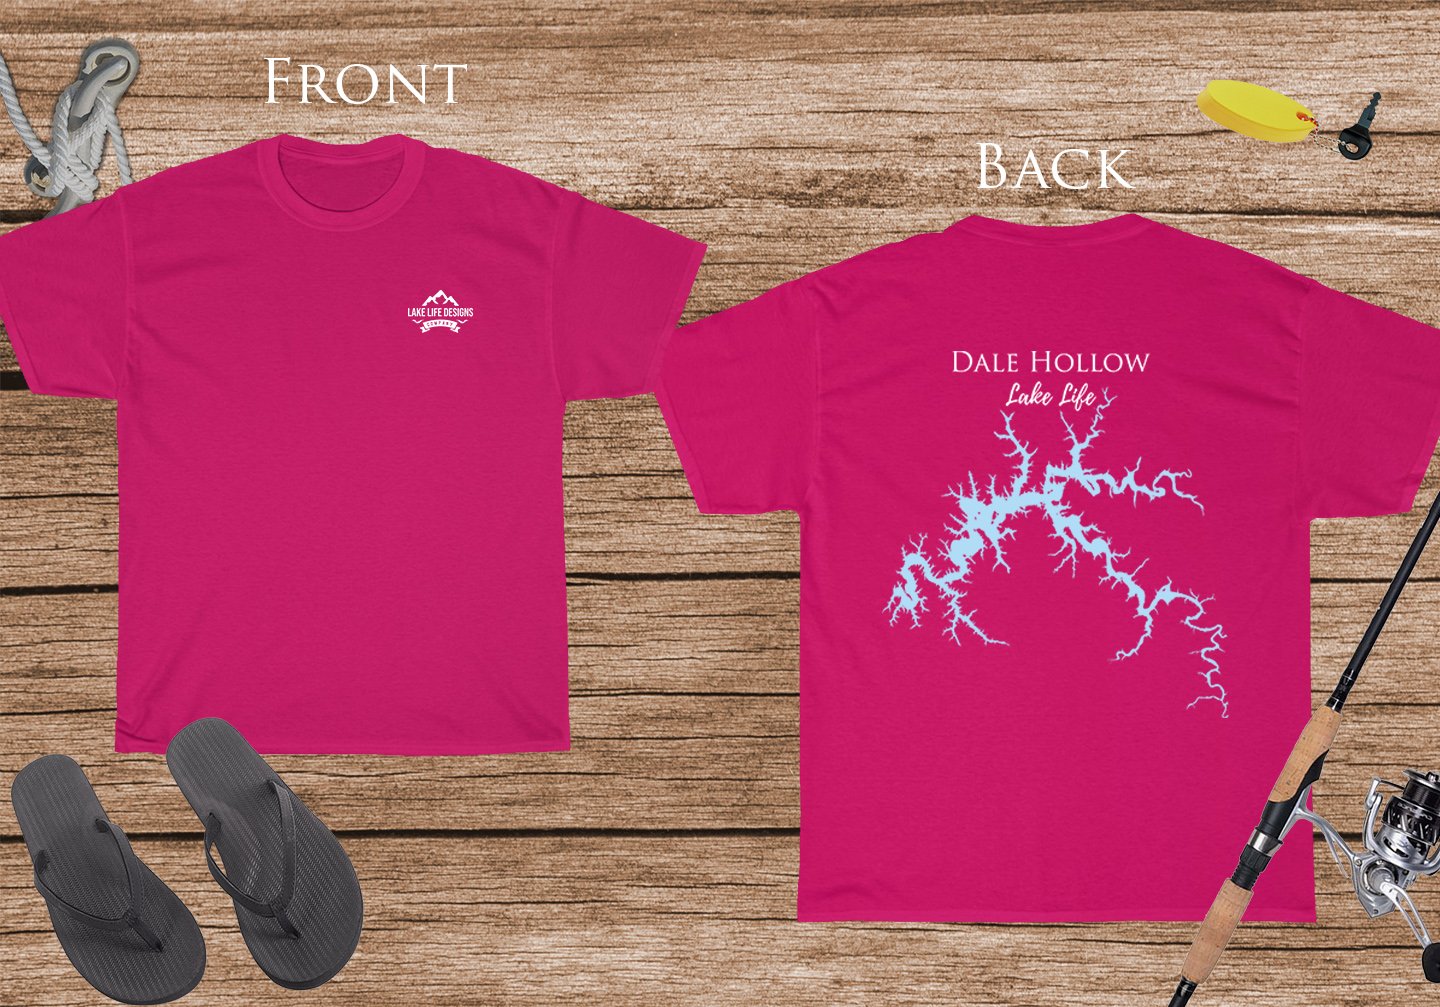 Dale Hollow Lake Life - Cotton Short Sleeved - FRONT & BACK PRINTED - Short Sleeved Cotton Tee - Tennessee Lake